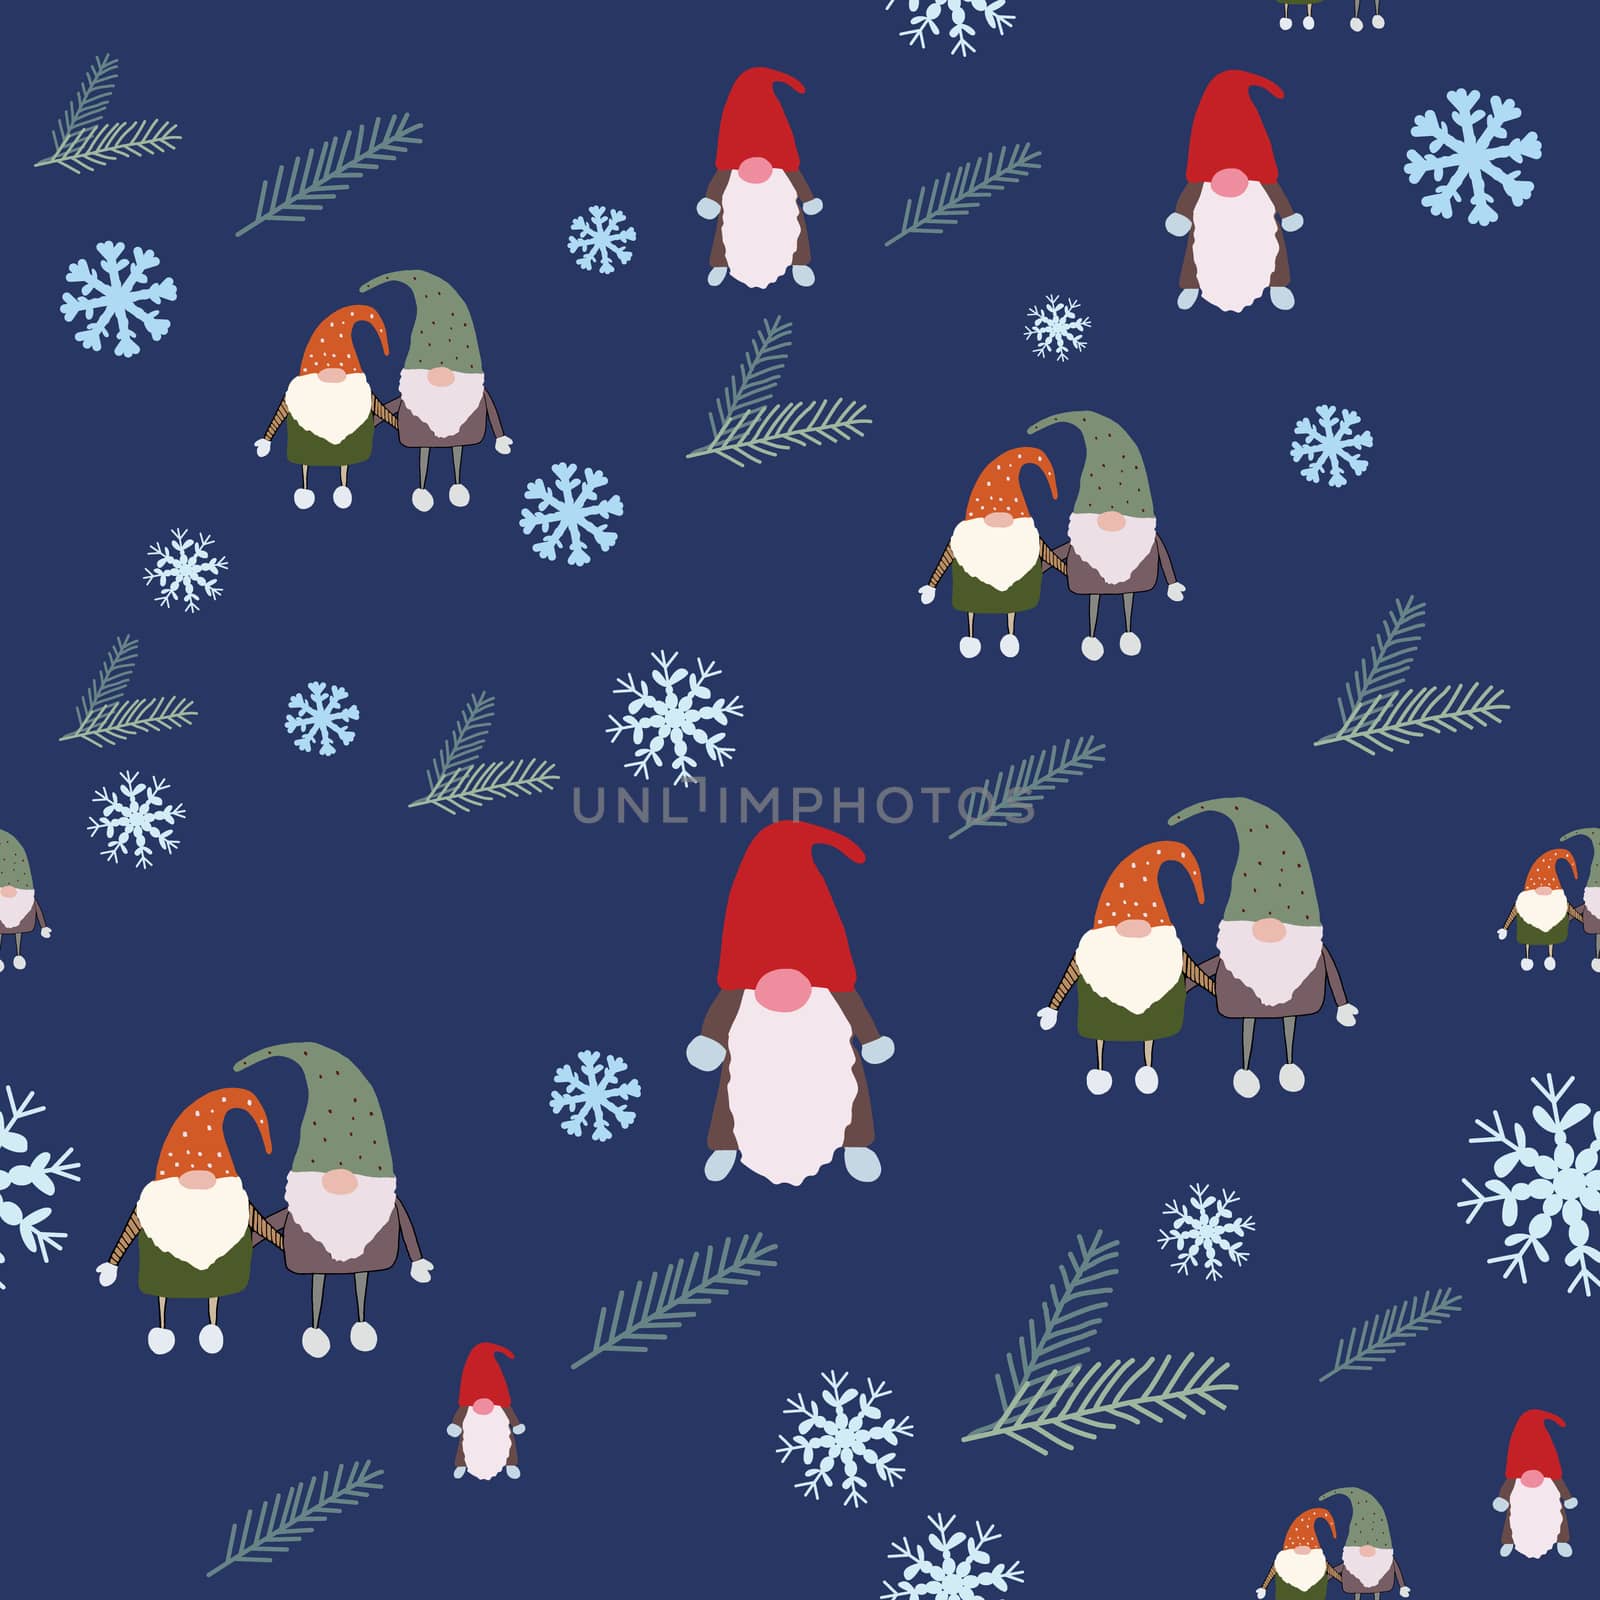 Seamless pattern with scandinavian gnomes, pine tree spruce and snowflakes. Beautiful festive design with elves decorations. For wrapping paper, textiles, fabric. Flat cartoon style vector illustration.